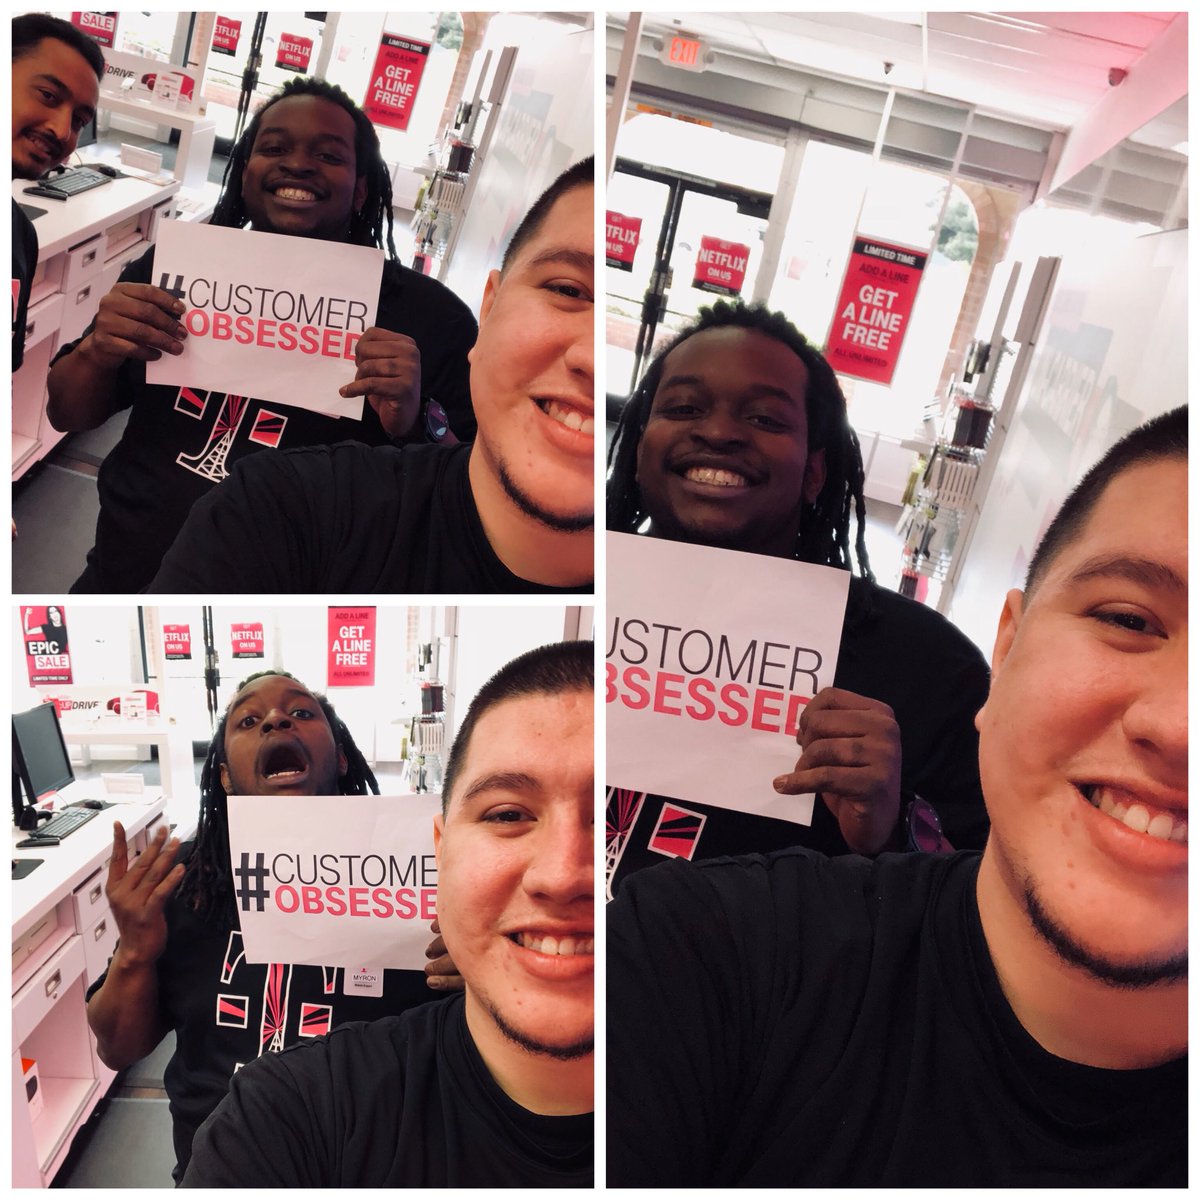 We #CUSTOMEROBSESSED over here in #DELIVERMORE #s9ONFLEEK @King_Oscar94 @JesstIn48  @MGonzal186  @RealEWInc